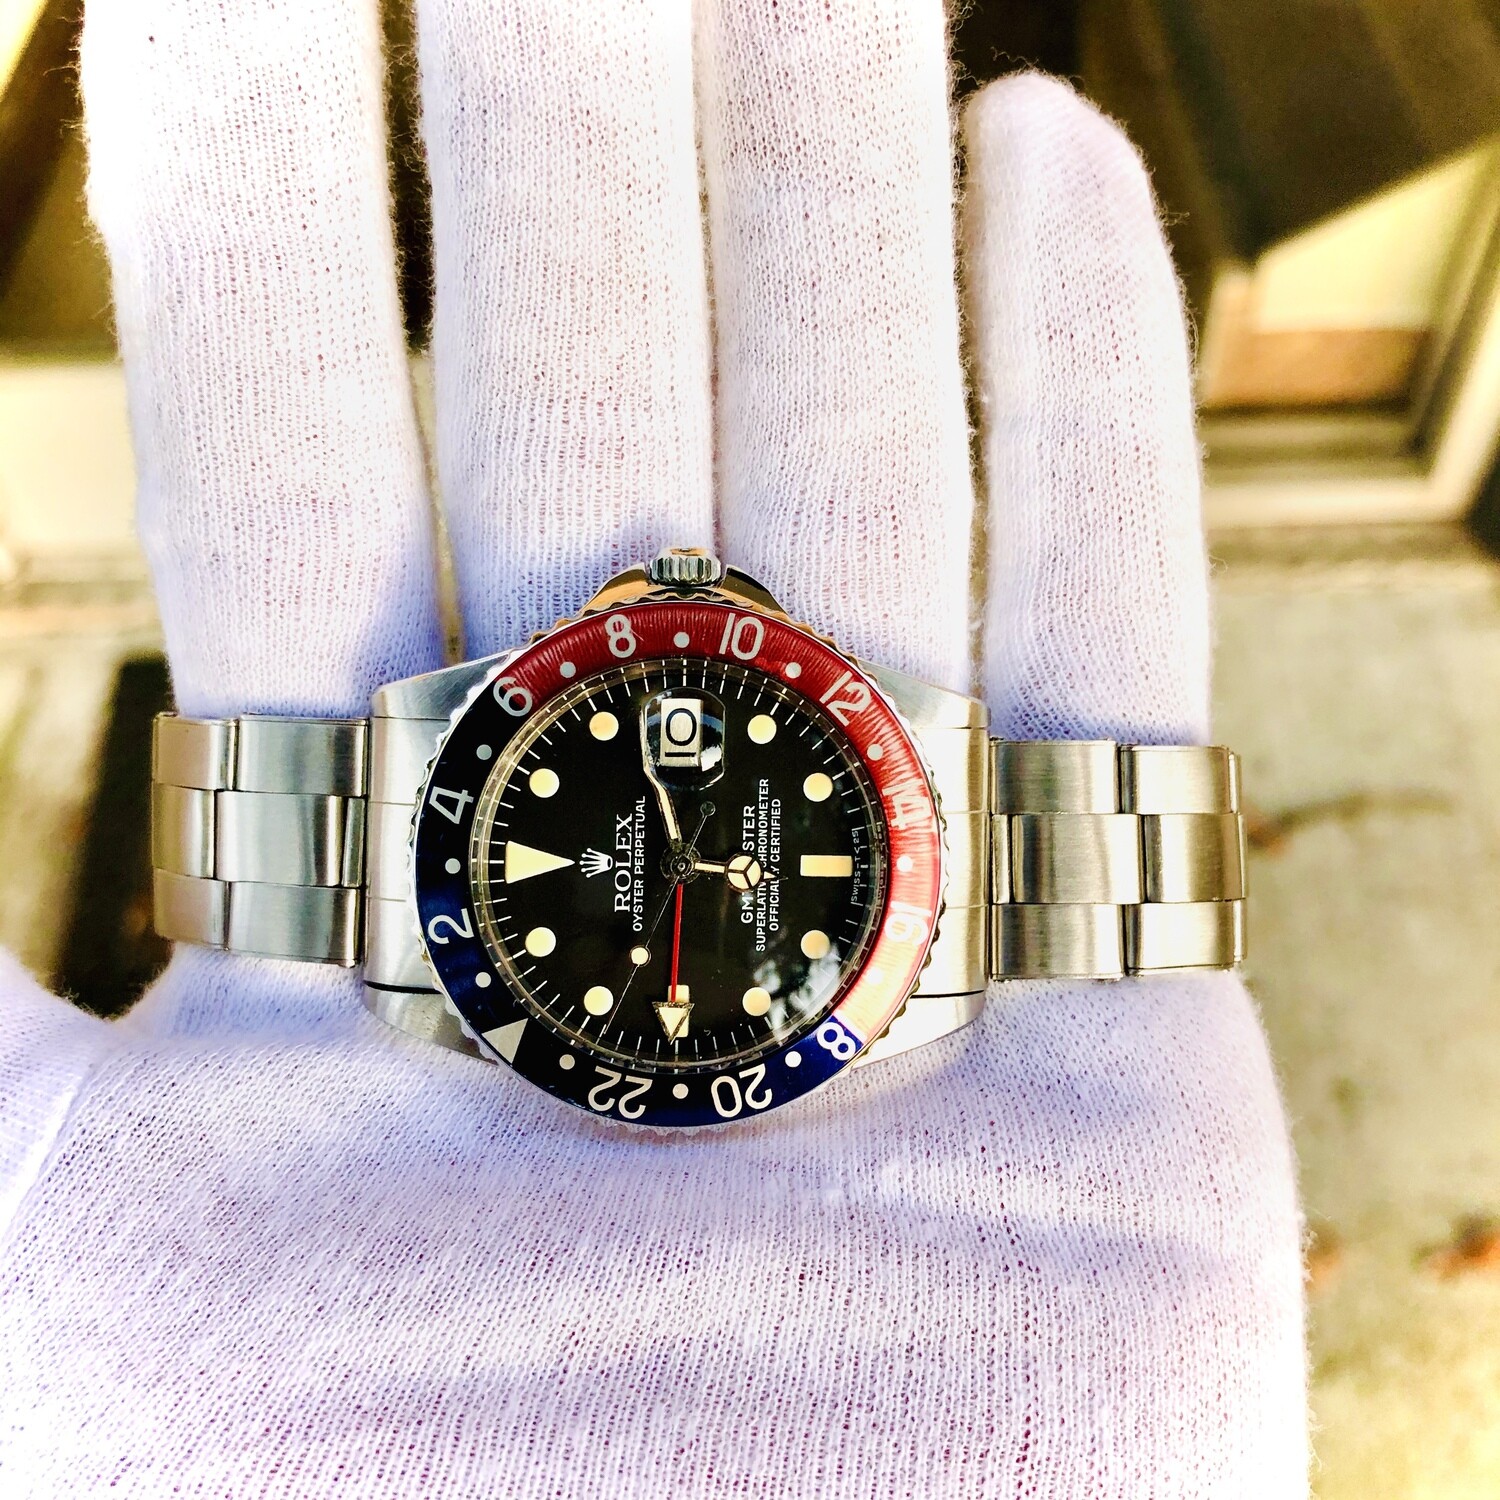 STUNNING 1960 Rolex GMT Master 1675 Pointy Guard on Matte Dial